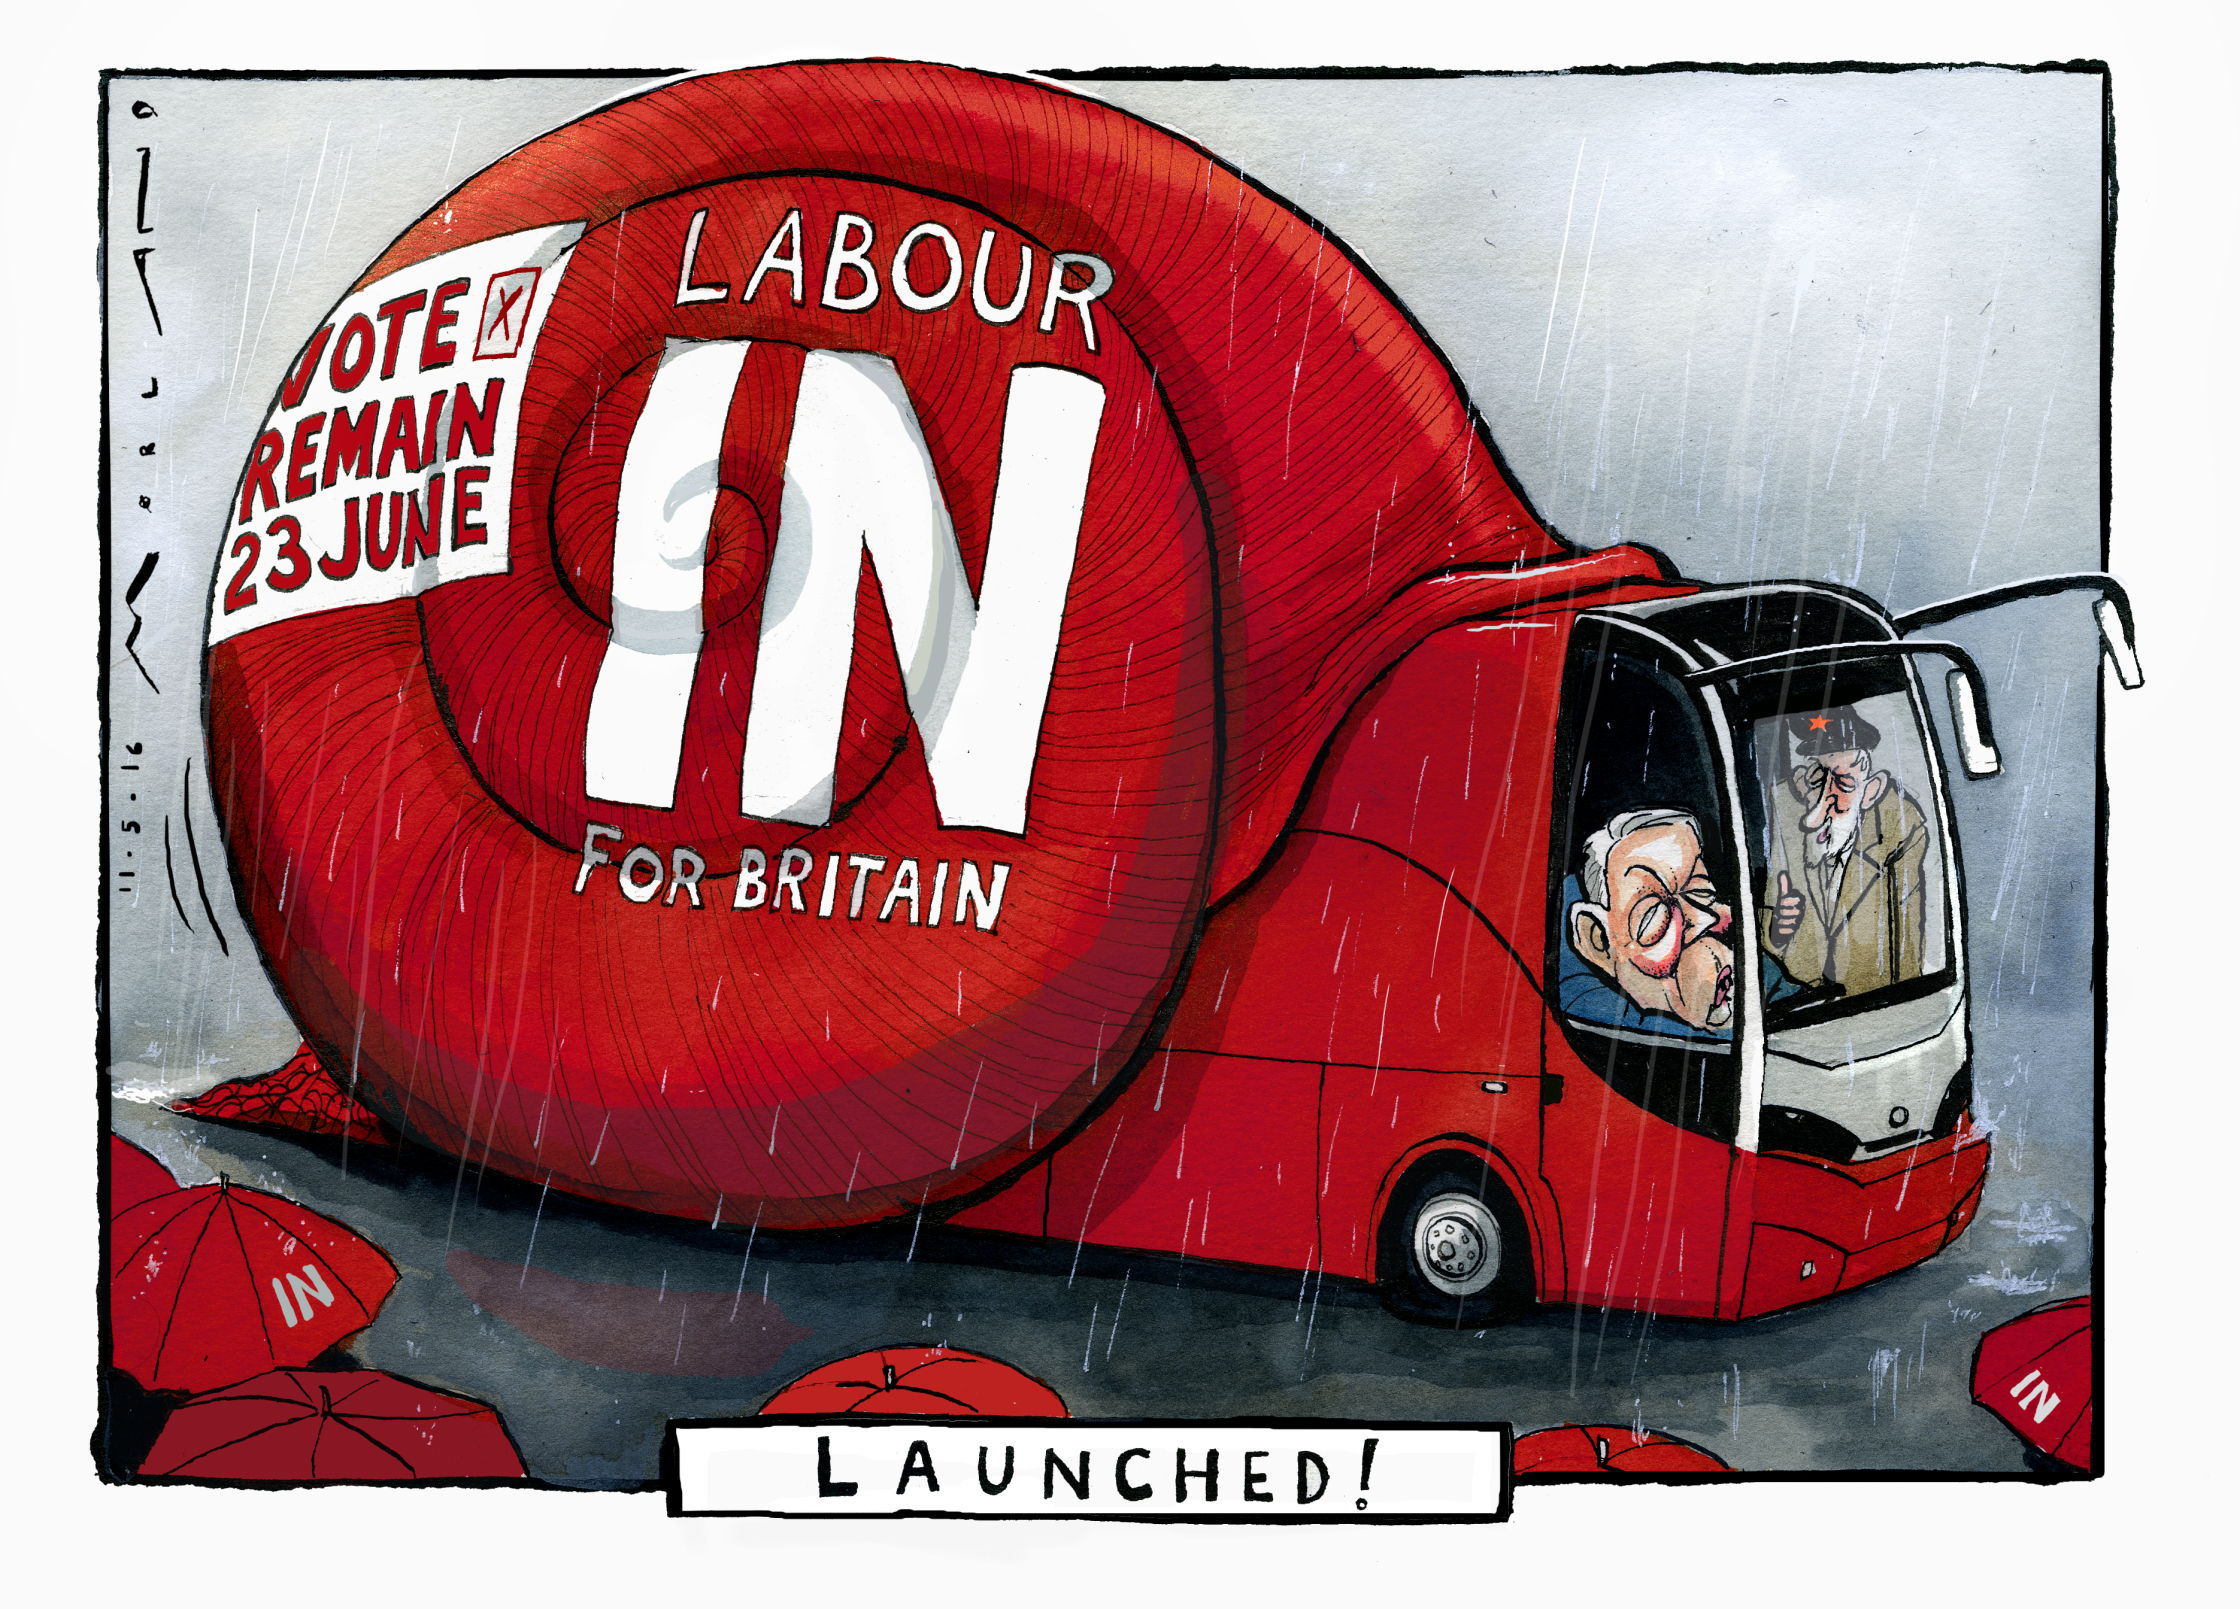 Labour In Launch.jpg